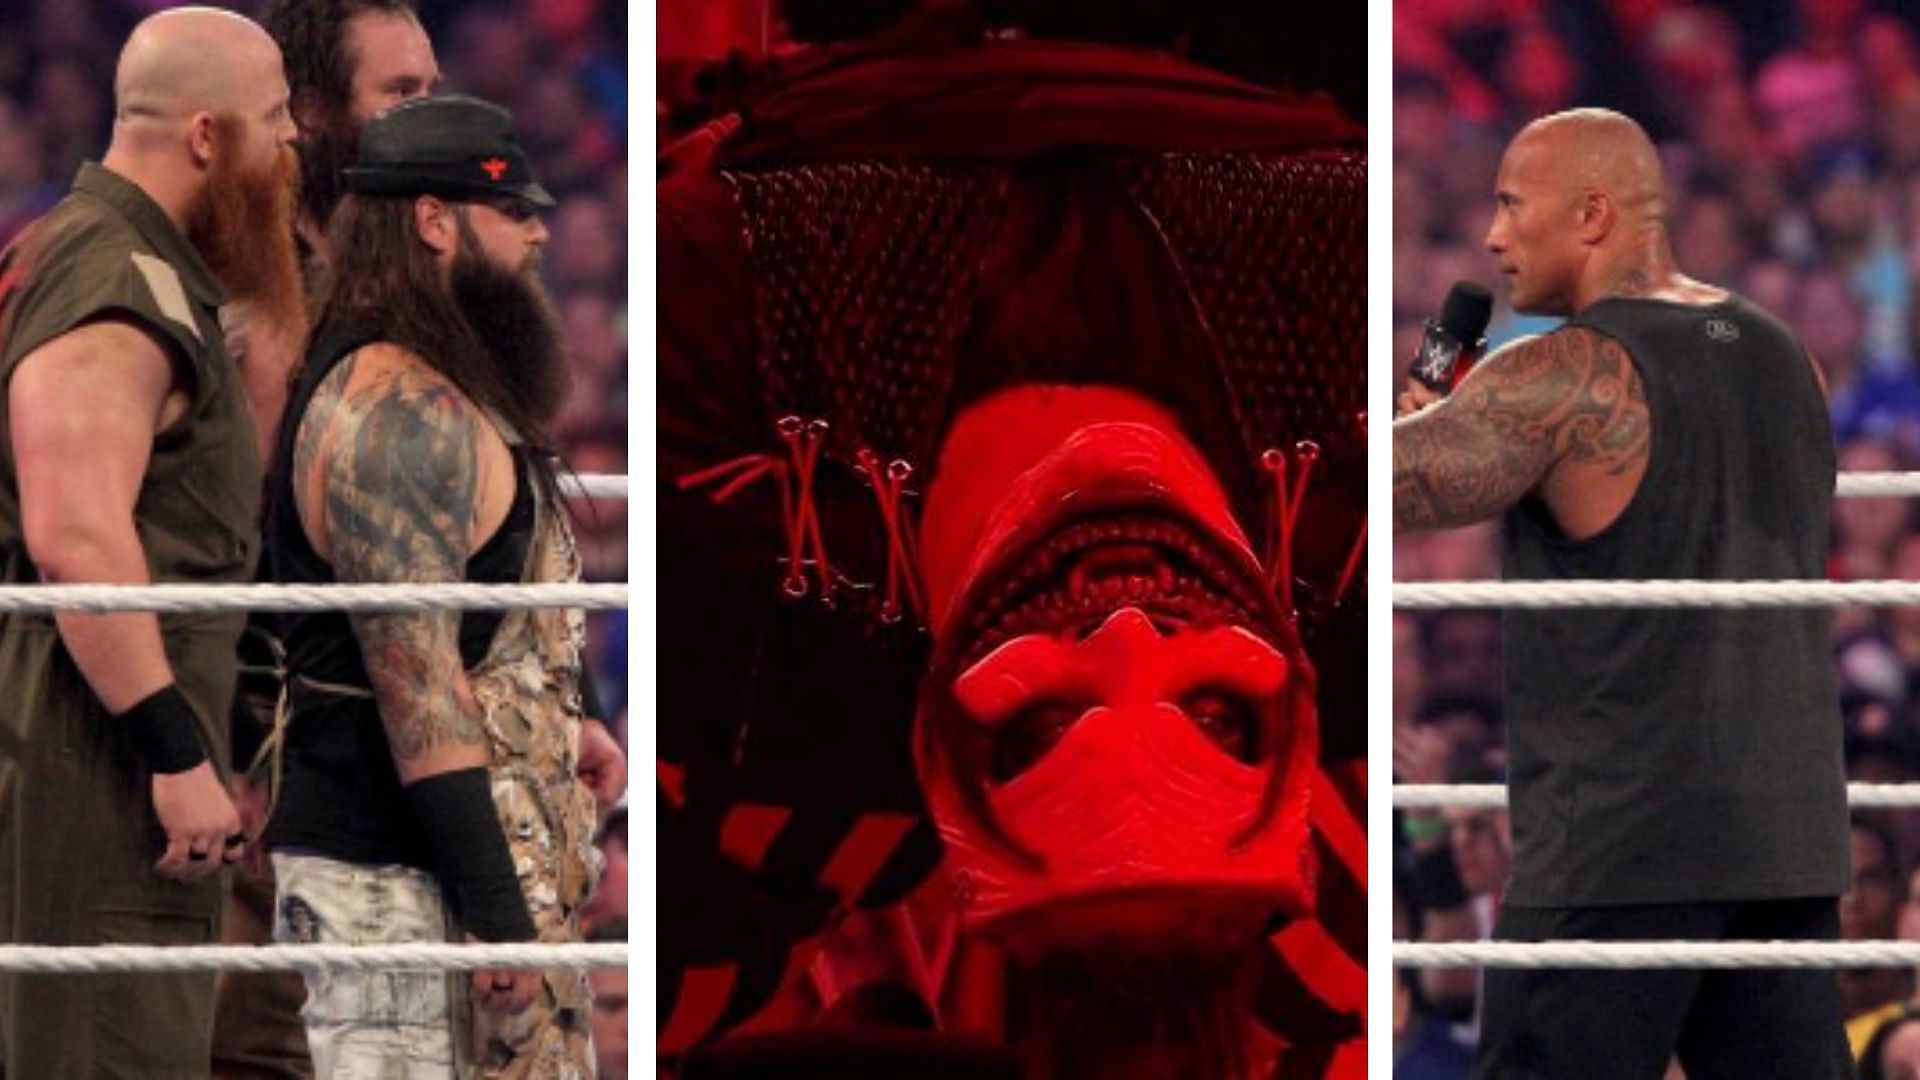 Wyatt has feuded with some high-profile names at WrestleMania.